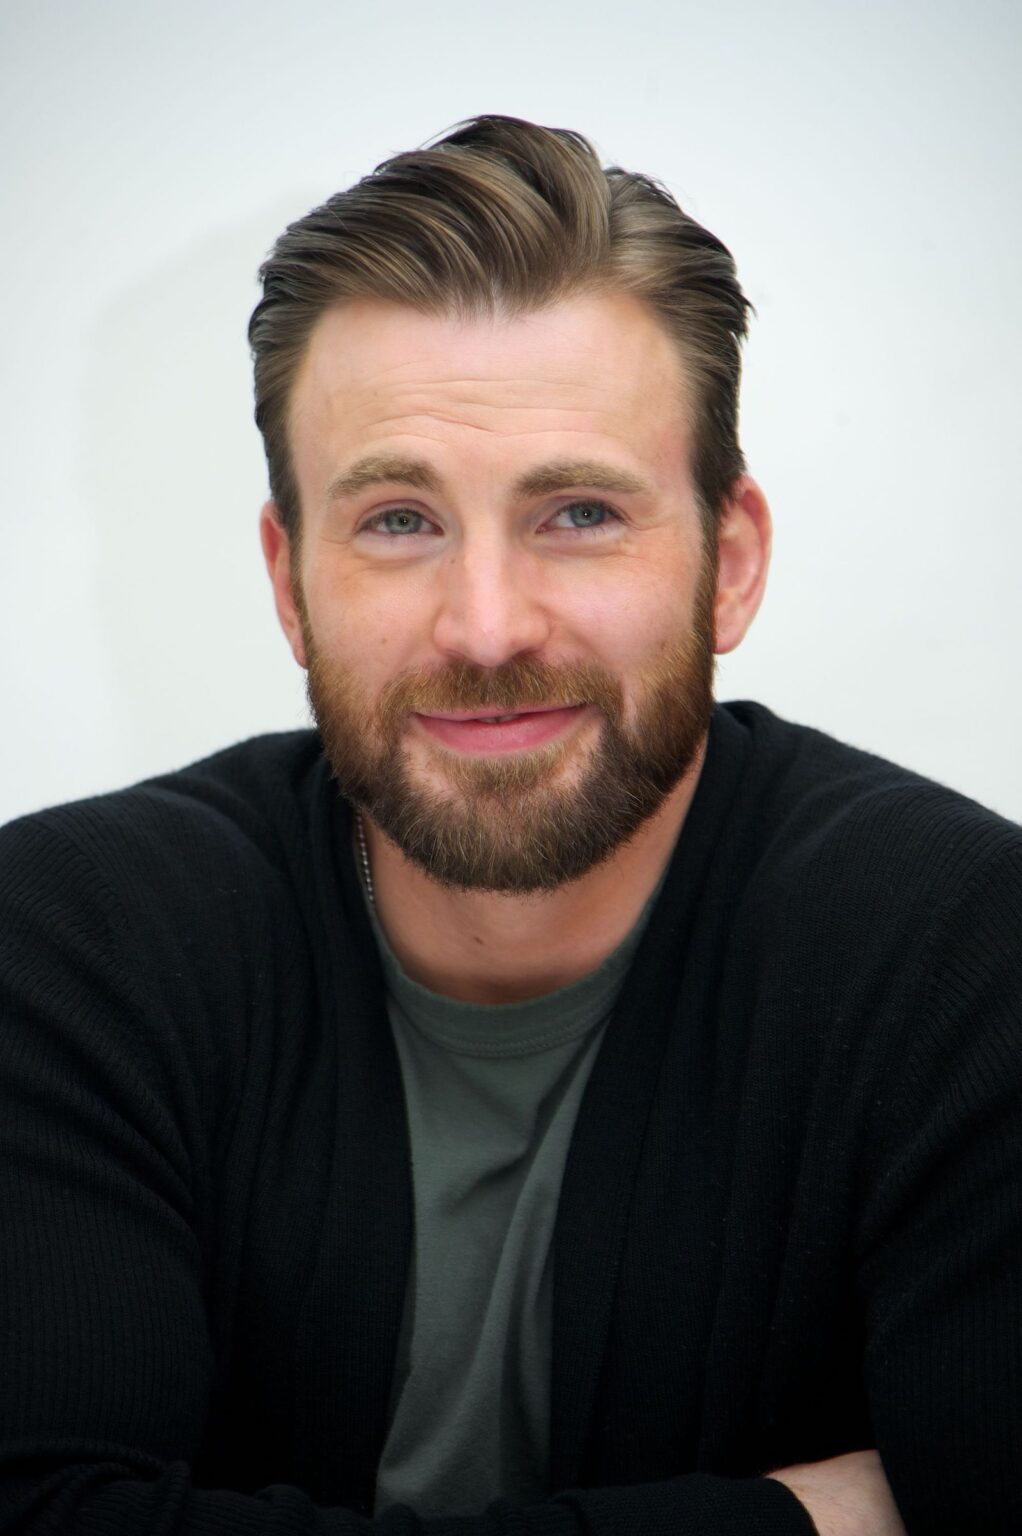 It looks like playing a beloved MCU superhero has a pretty good payday. Check out Chris Evans' net worth right here.